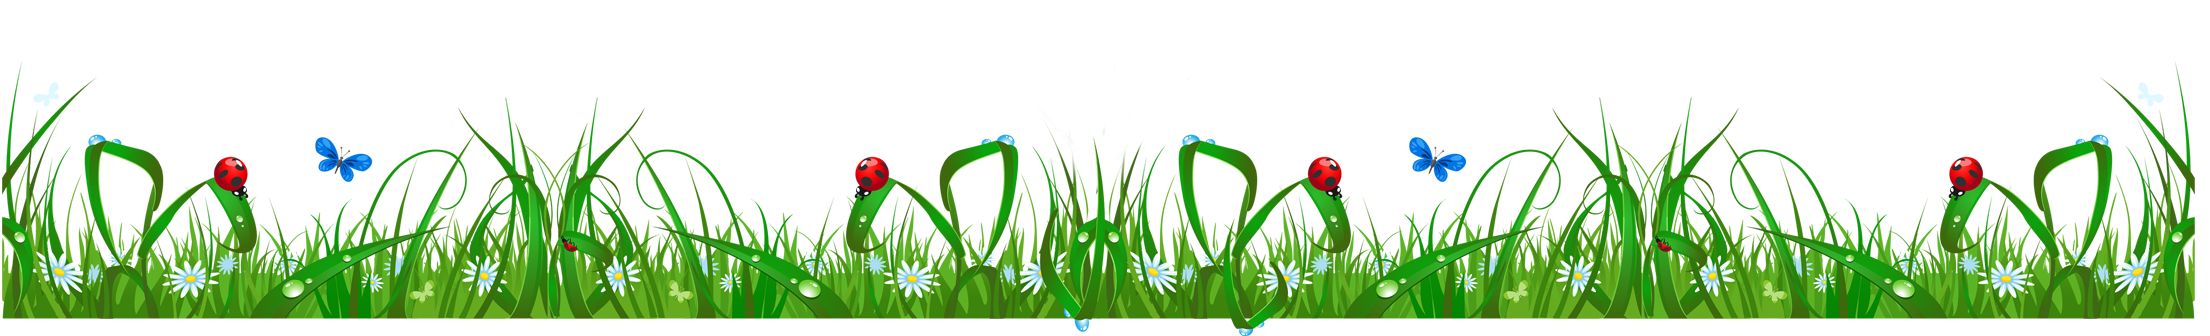 Lawn cute pencil and. Grass clipart ladybug